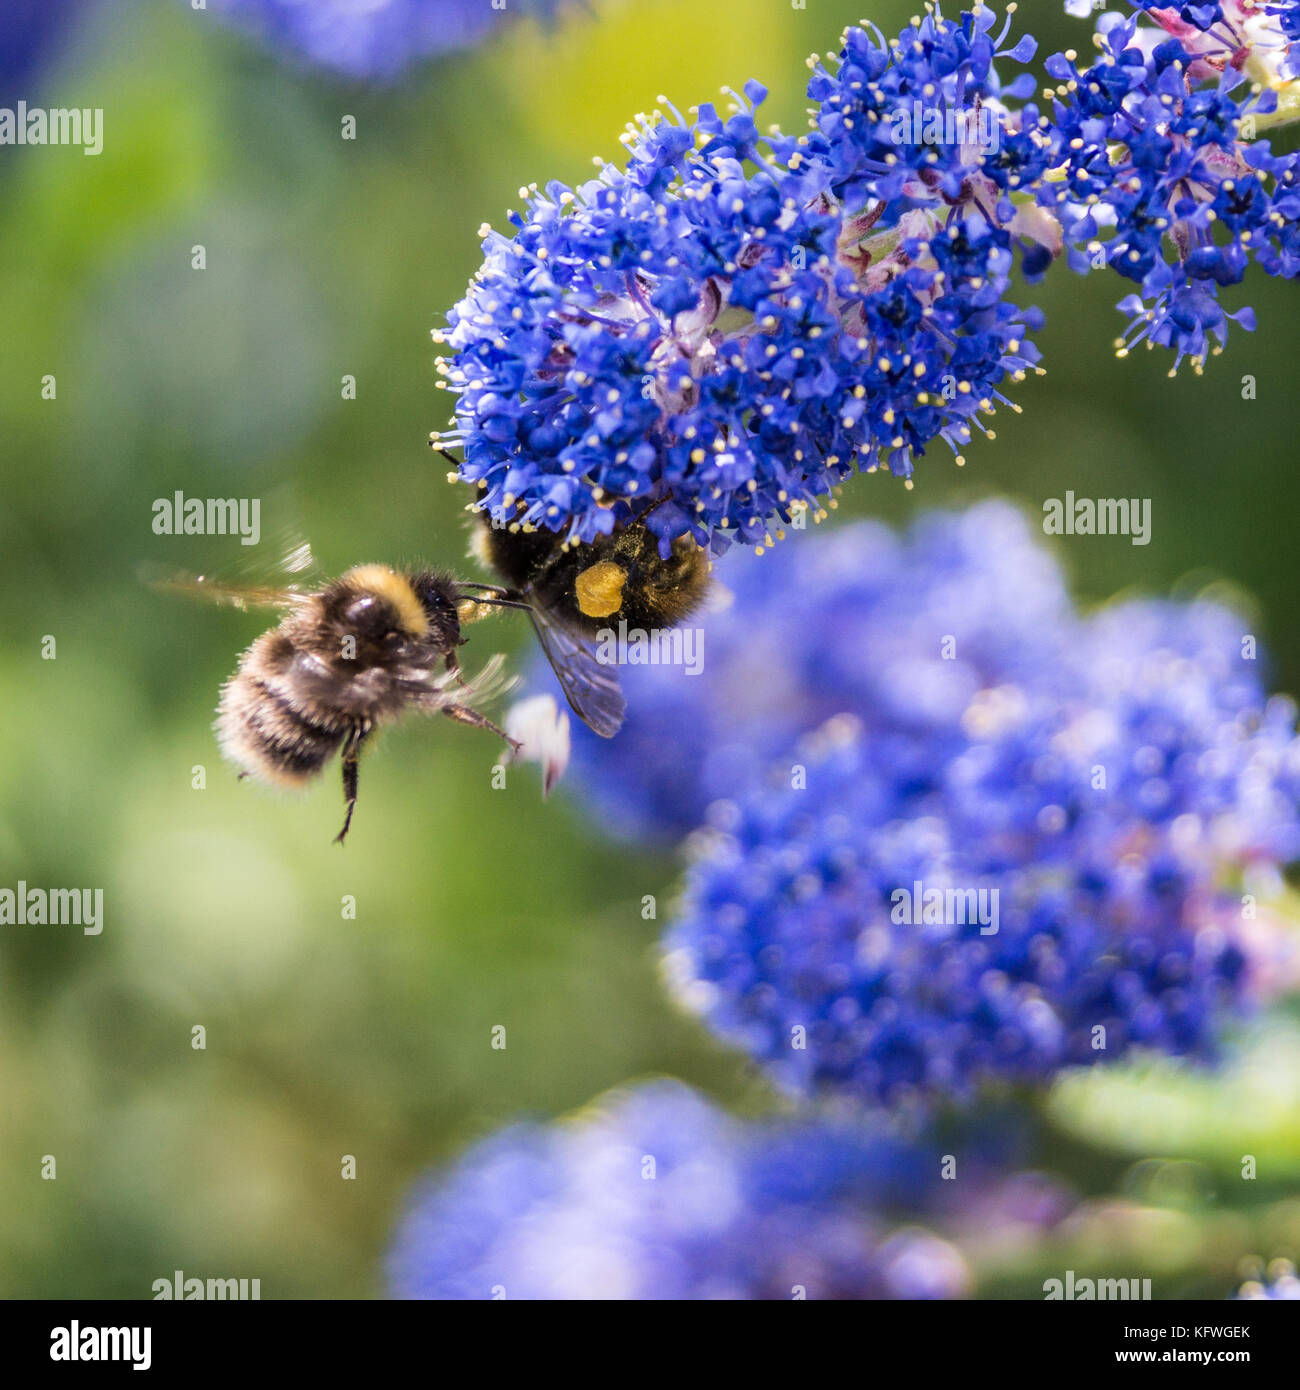 Two bees meet whilst collecting pollen from a california lilac bush ...